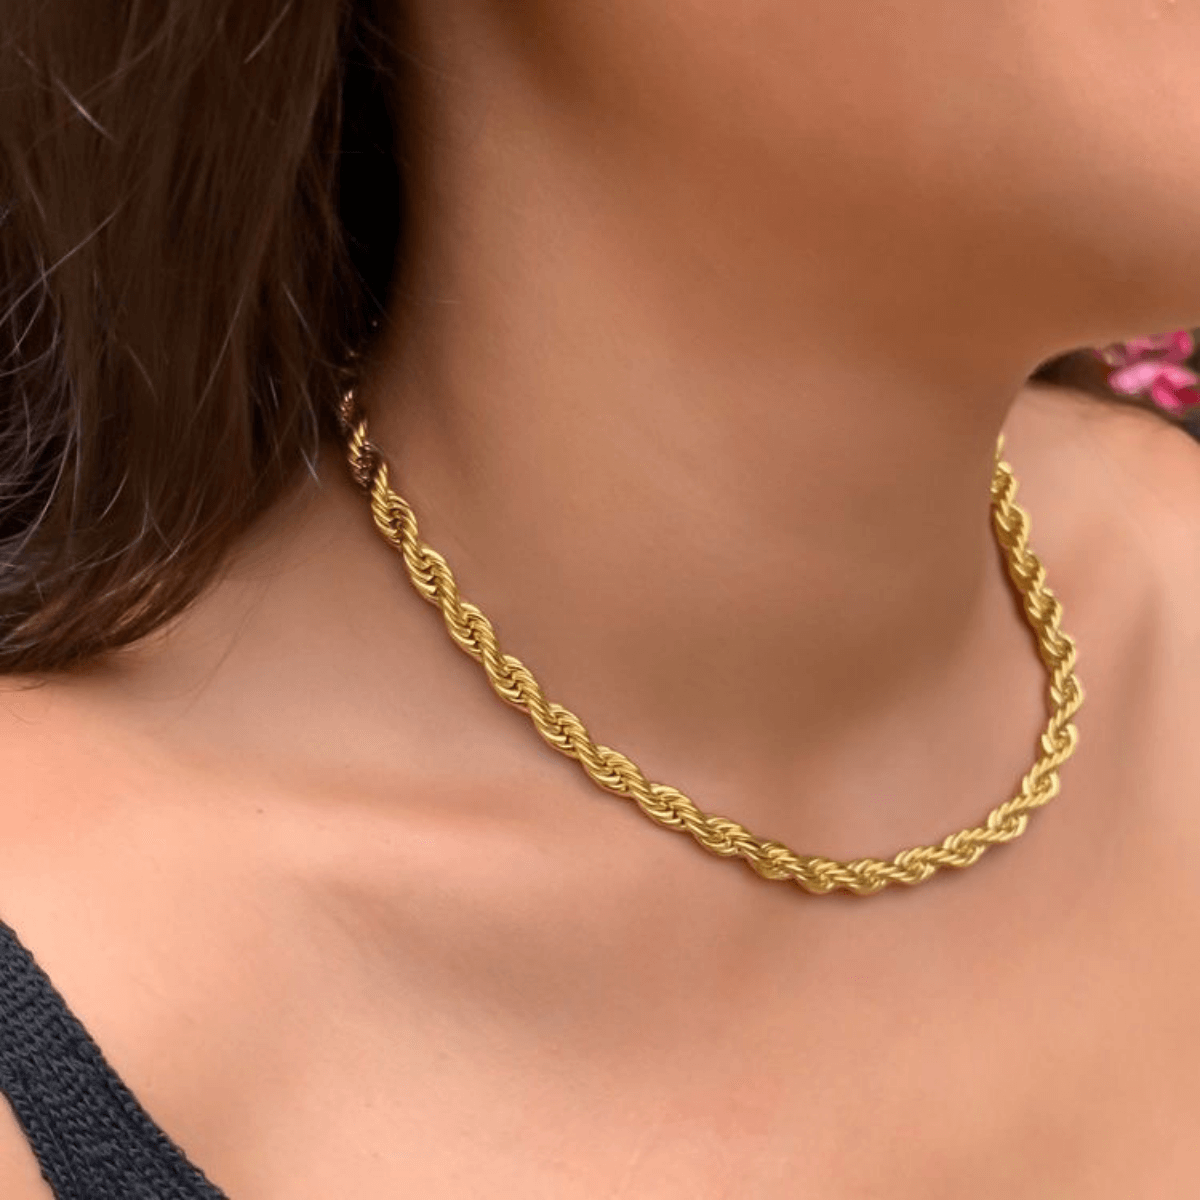 #1 Best Gold Rope Chain Necklace for Women | Best Trending Gold Jewelry Gift for Women | Best Trending Gold Chain Necklace Jewelry Gift for Women